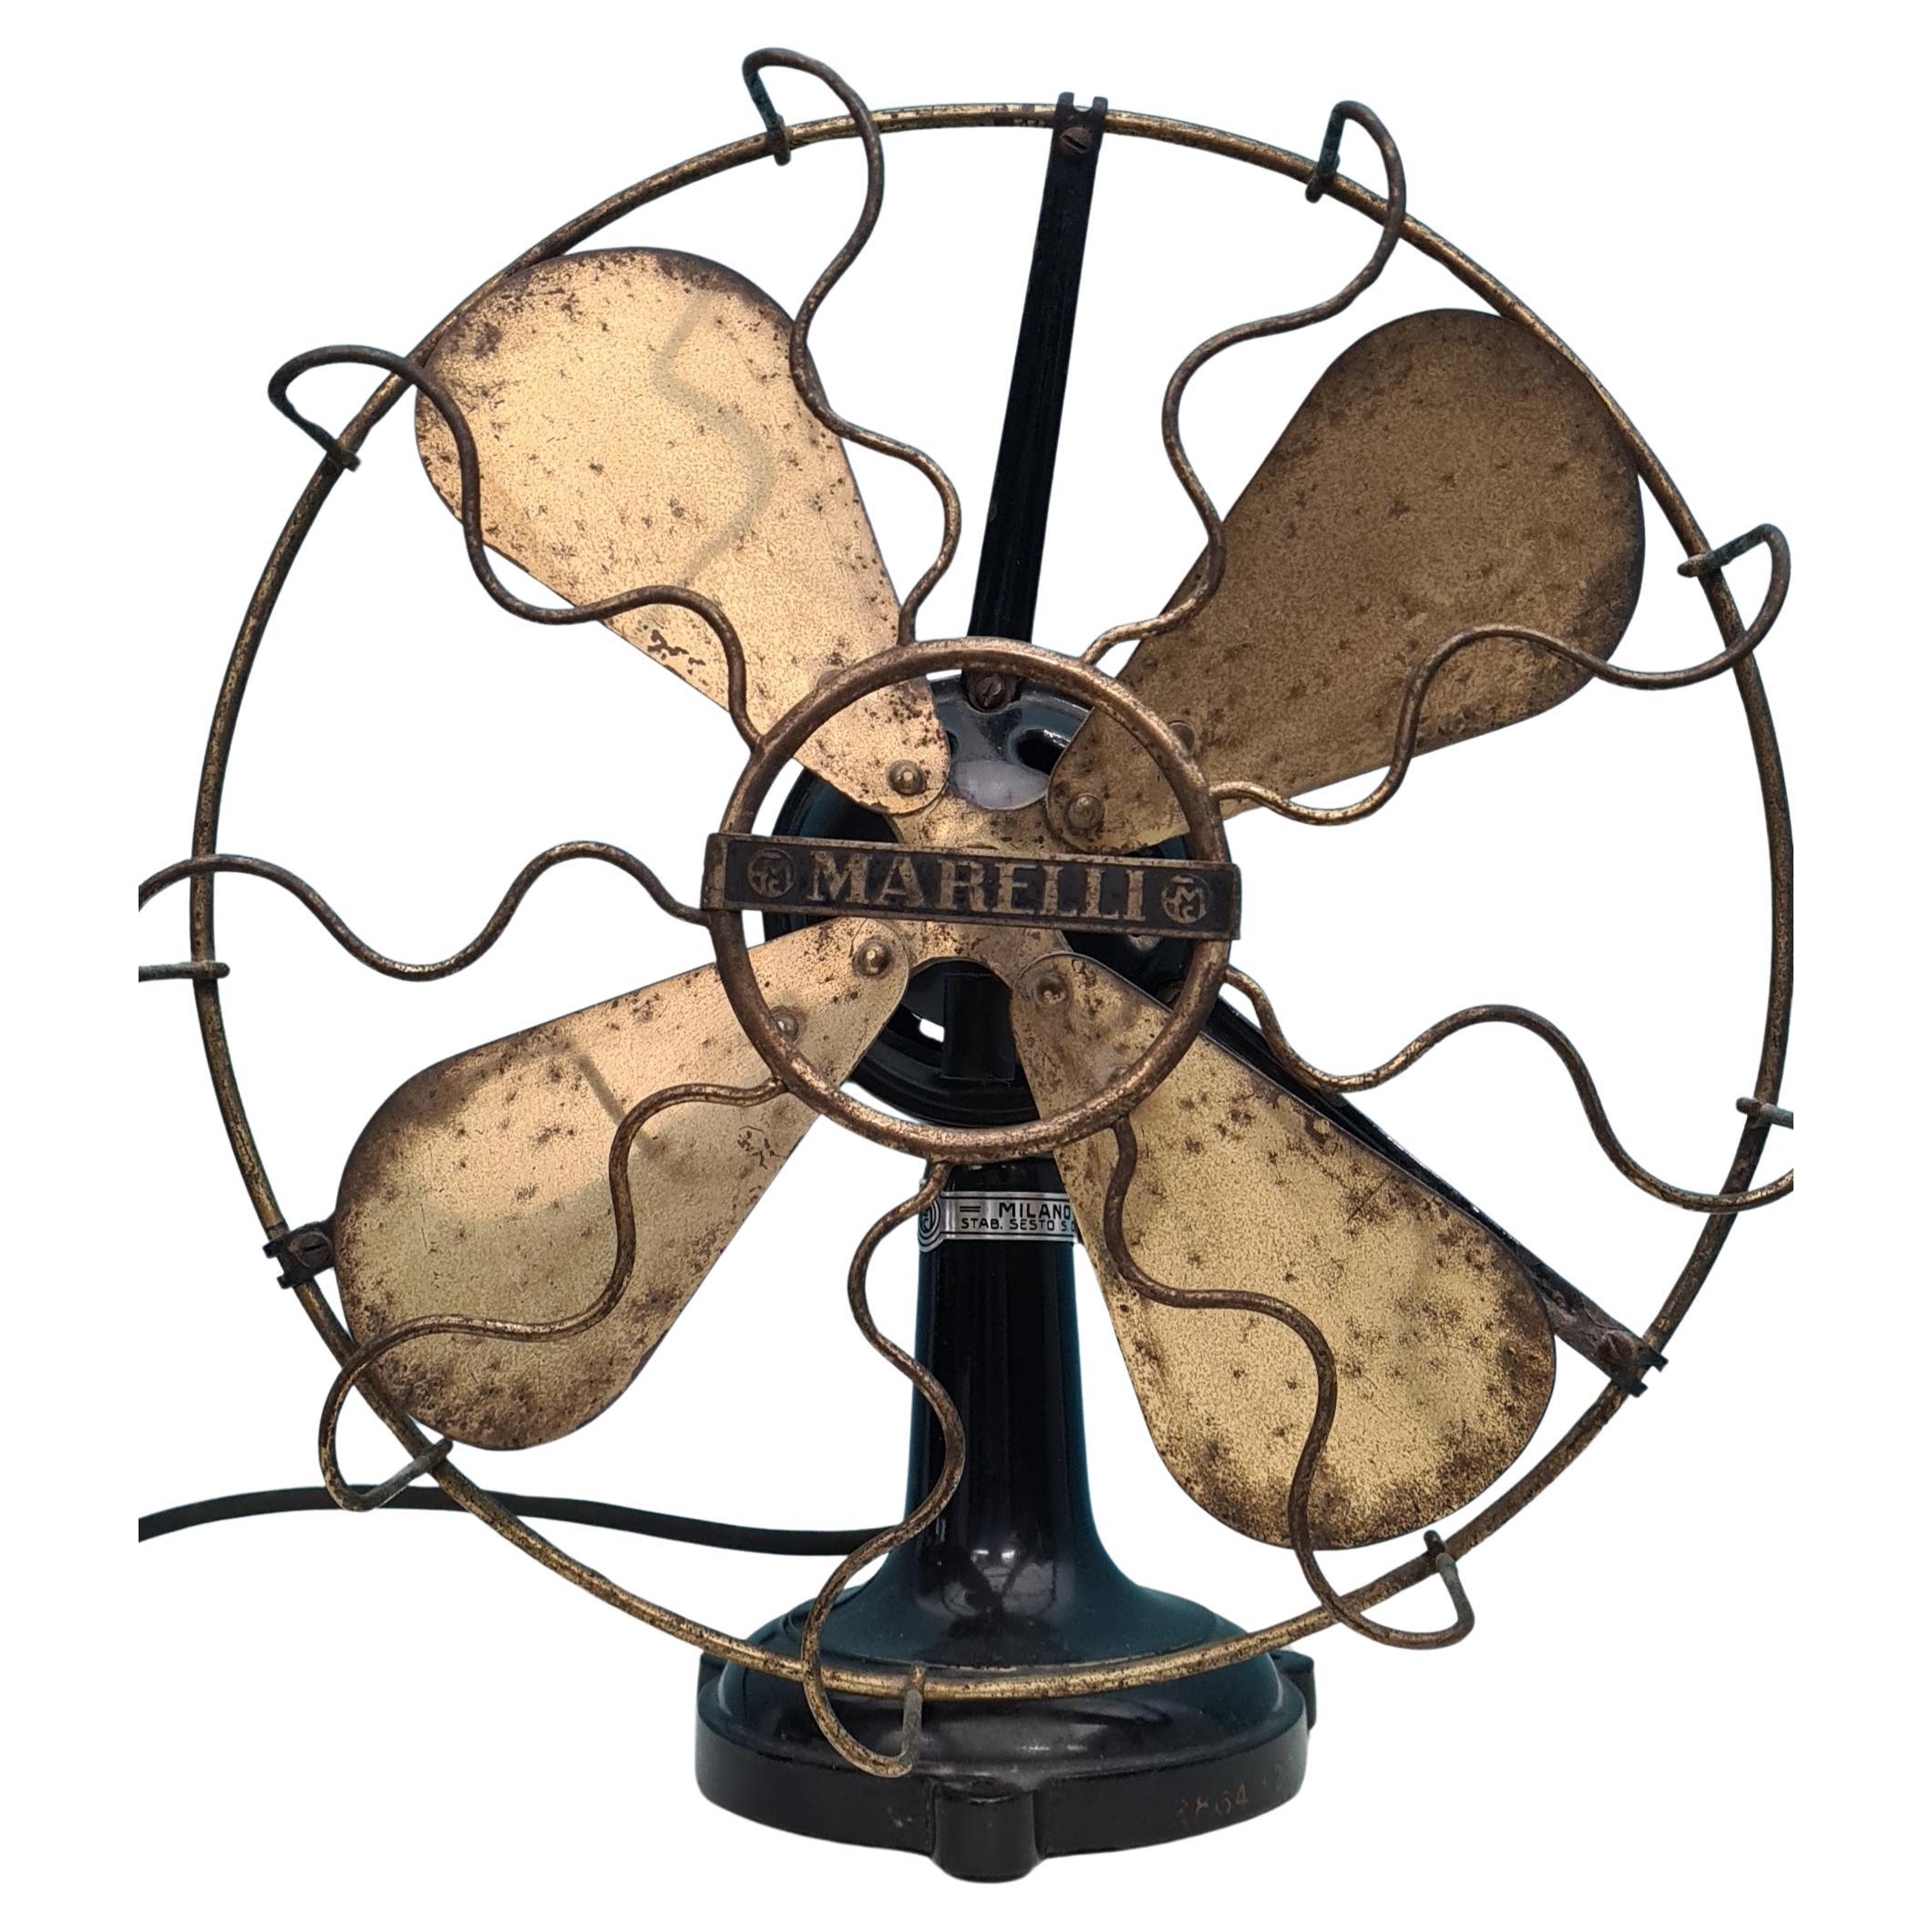 Industrial table fan by Ercole Marelli For Sale